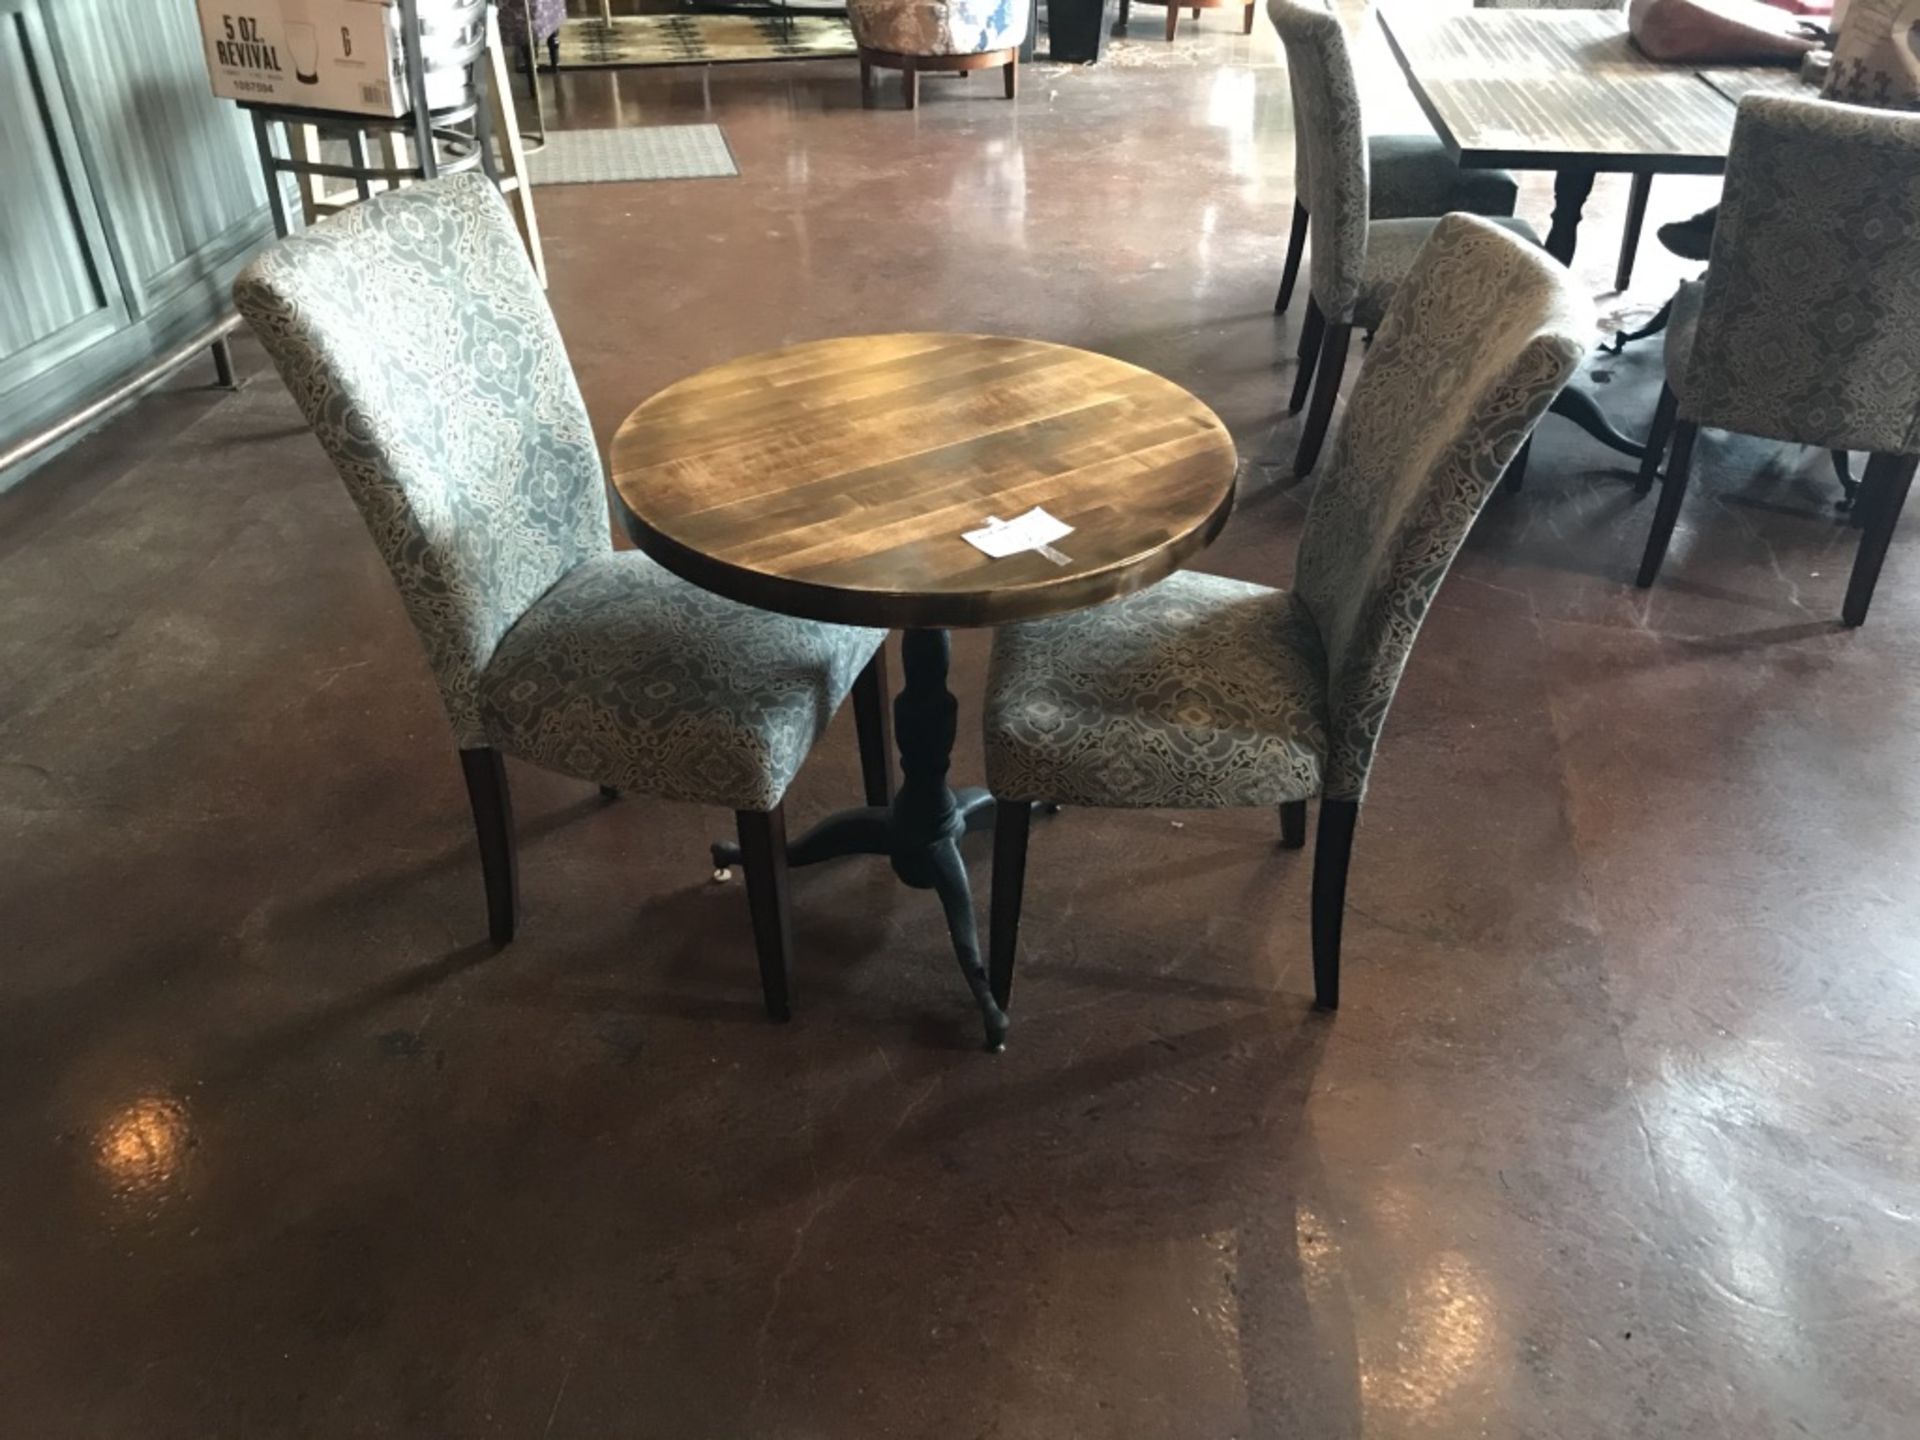 LOT OF: 36" ROUND WOODEN PEDESTAL TABLE W/ (2) CLOTH CHAIRS